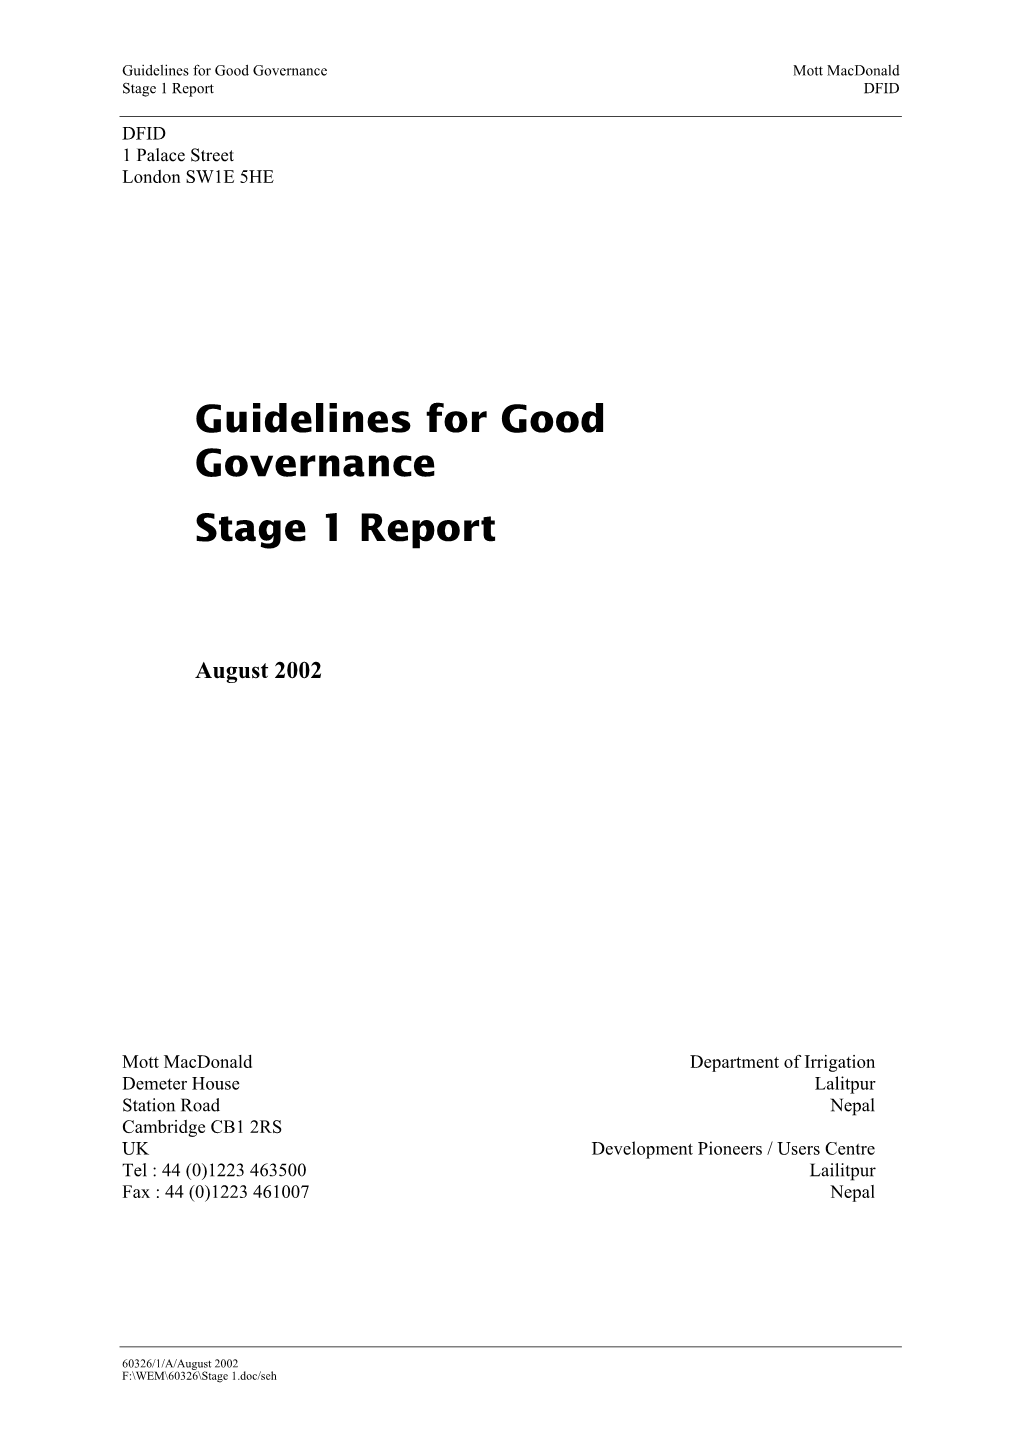 Guidelines for Good Governance Stage 1 Report